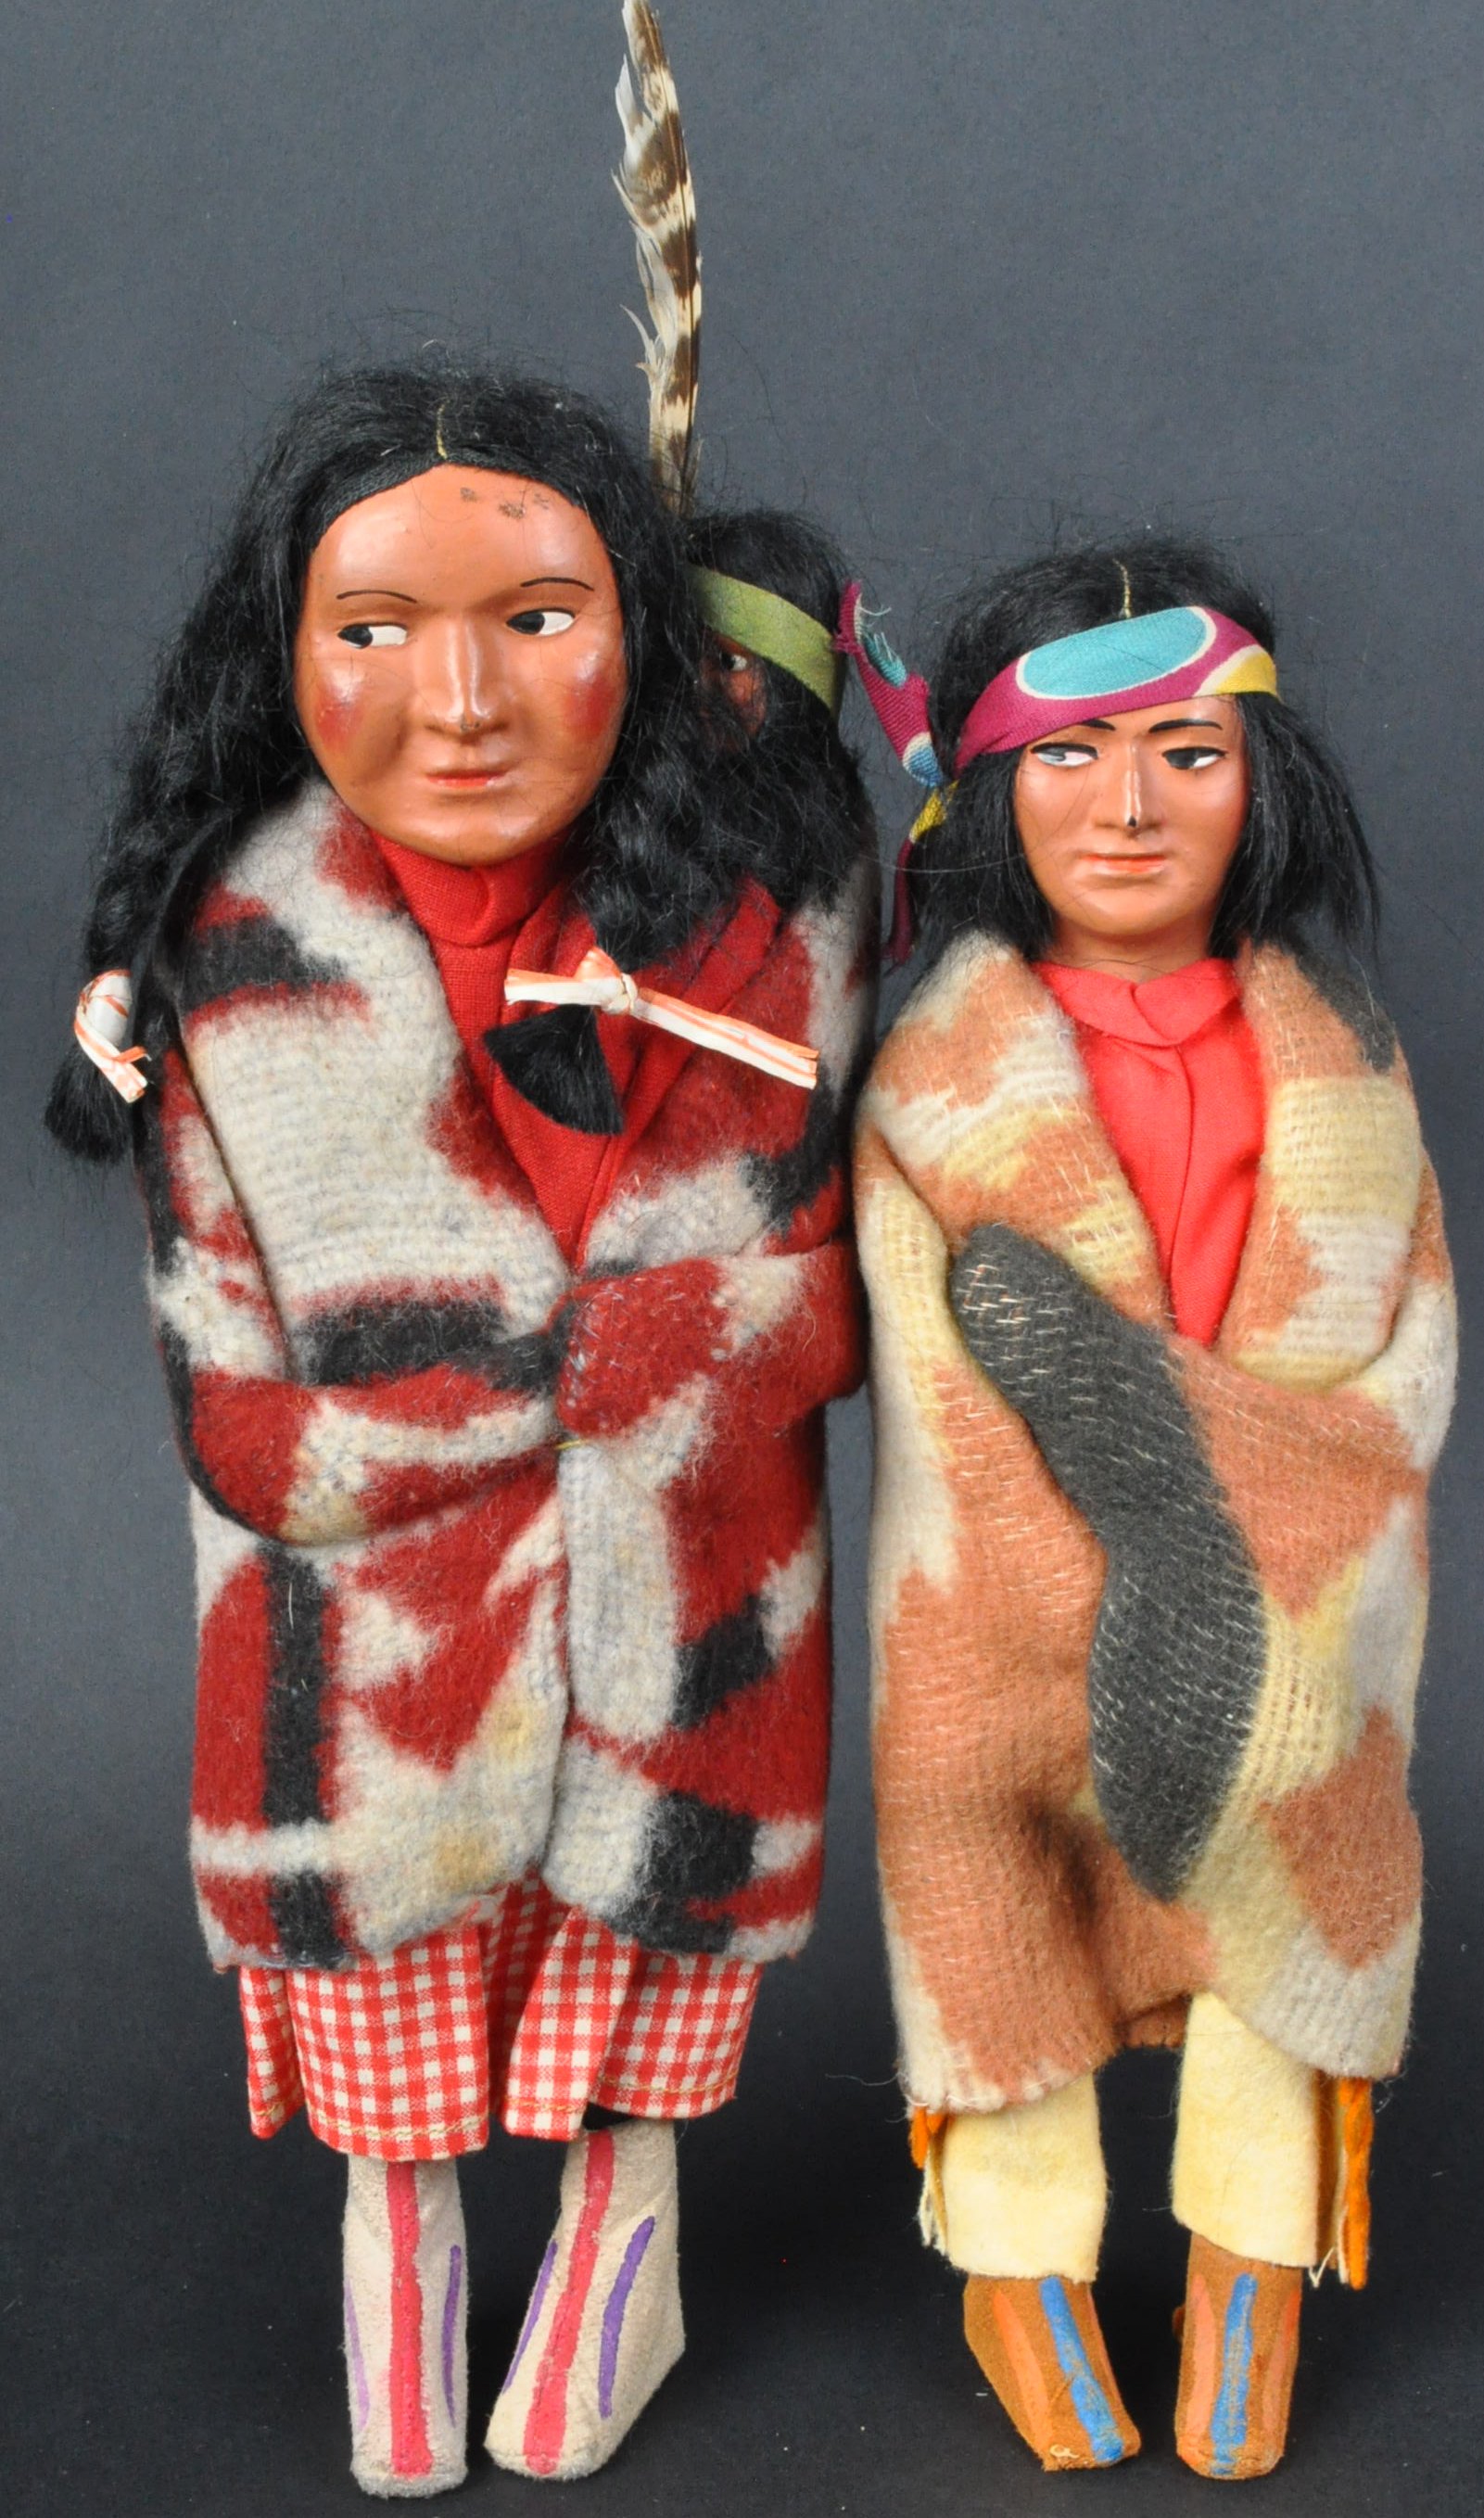 TWO EARLY 20TH CENTURY AMERICAN INDIAN SKOOKUM DOLLS